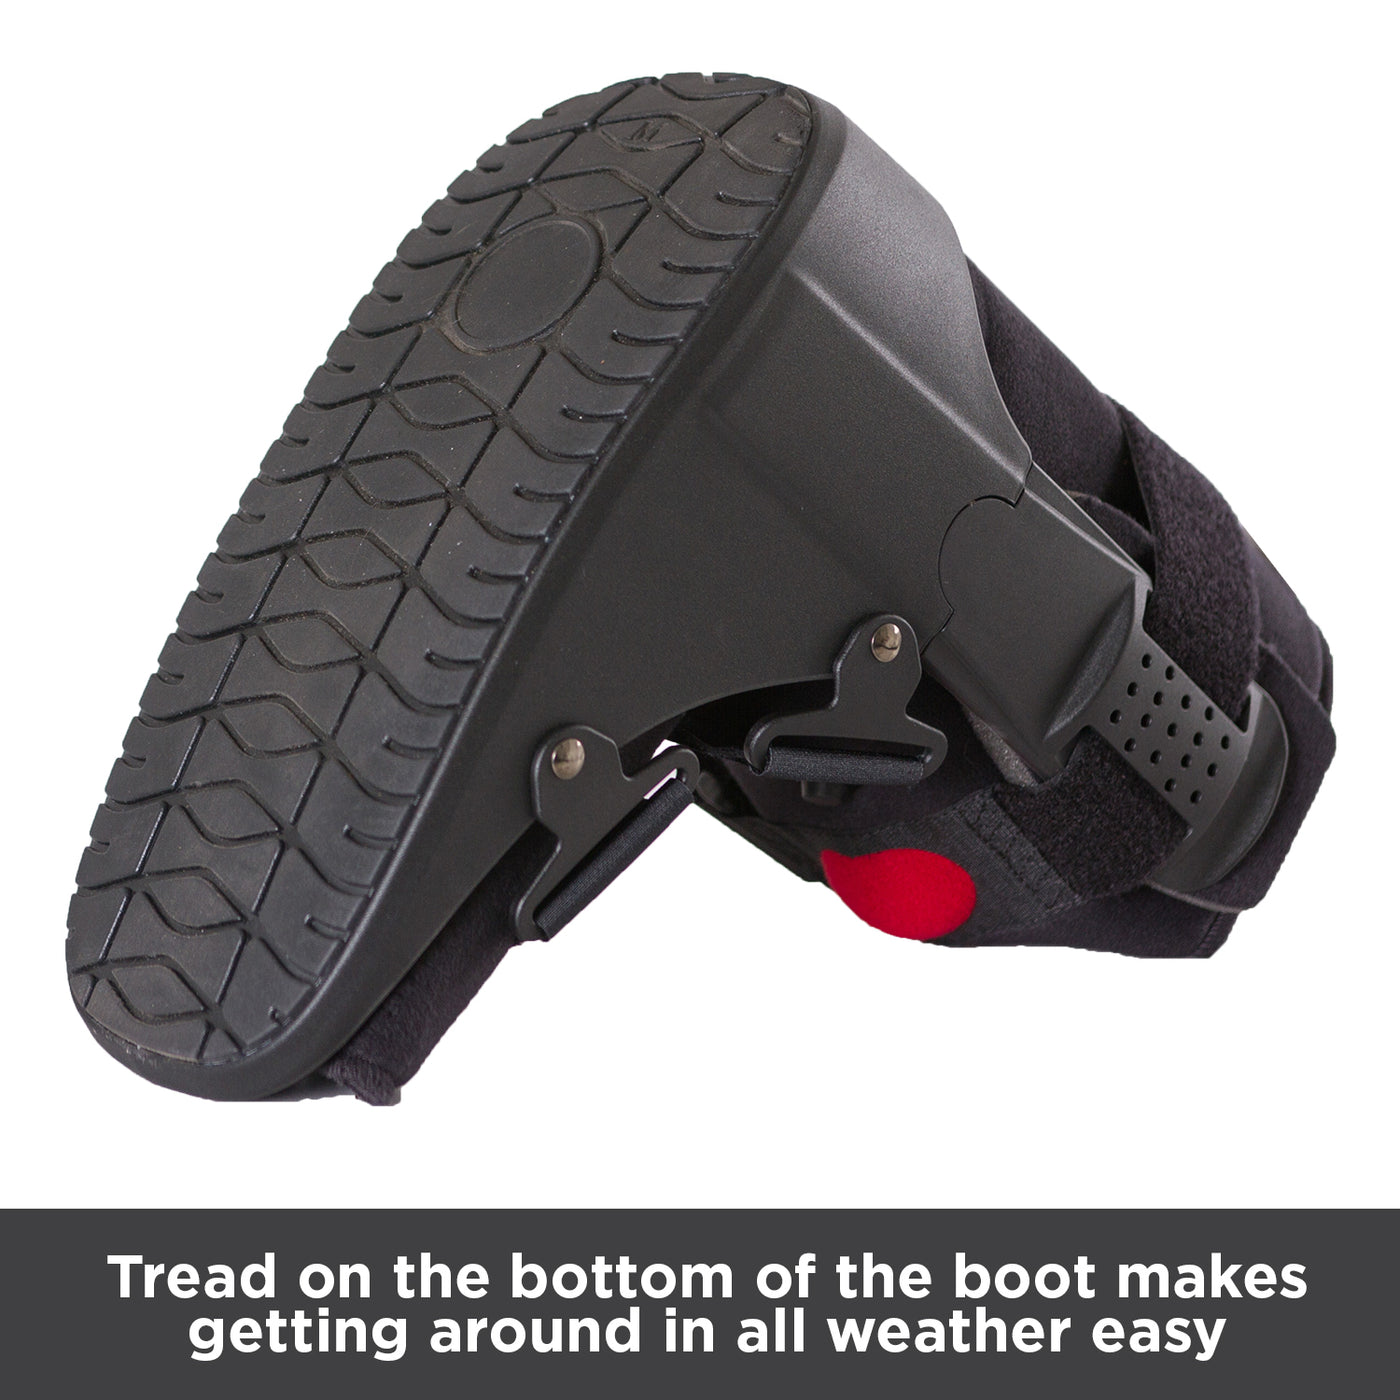 Tread on the bottom of the boot makes getting around in all weather easy